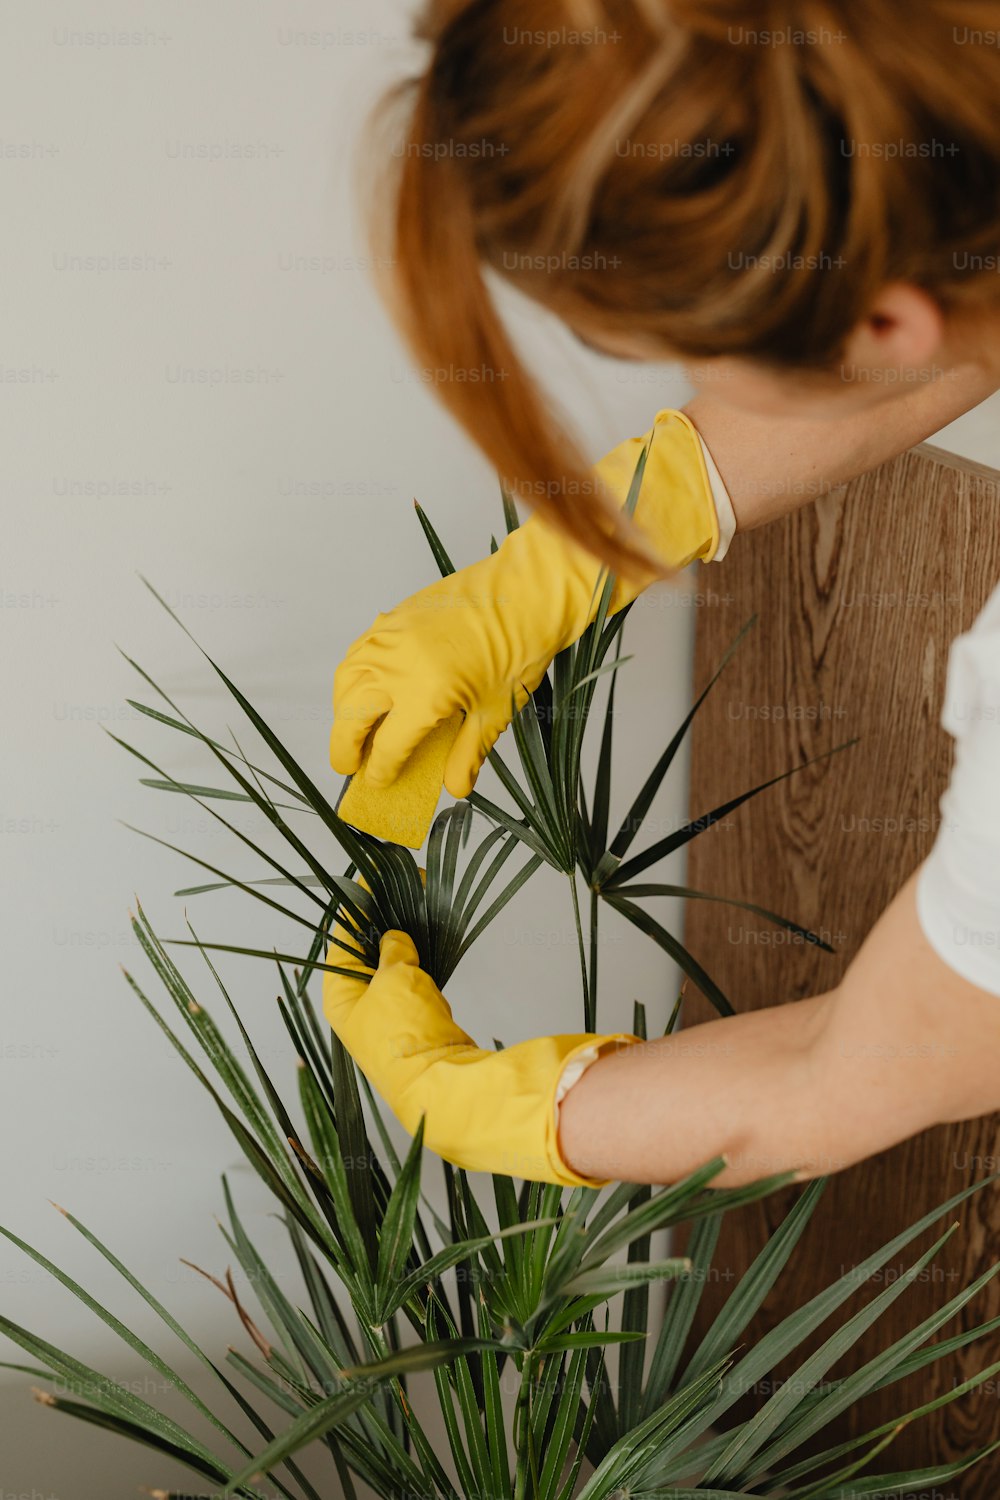 a woman in yellow gloves cleaning a potted plant